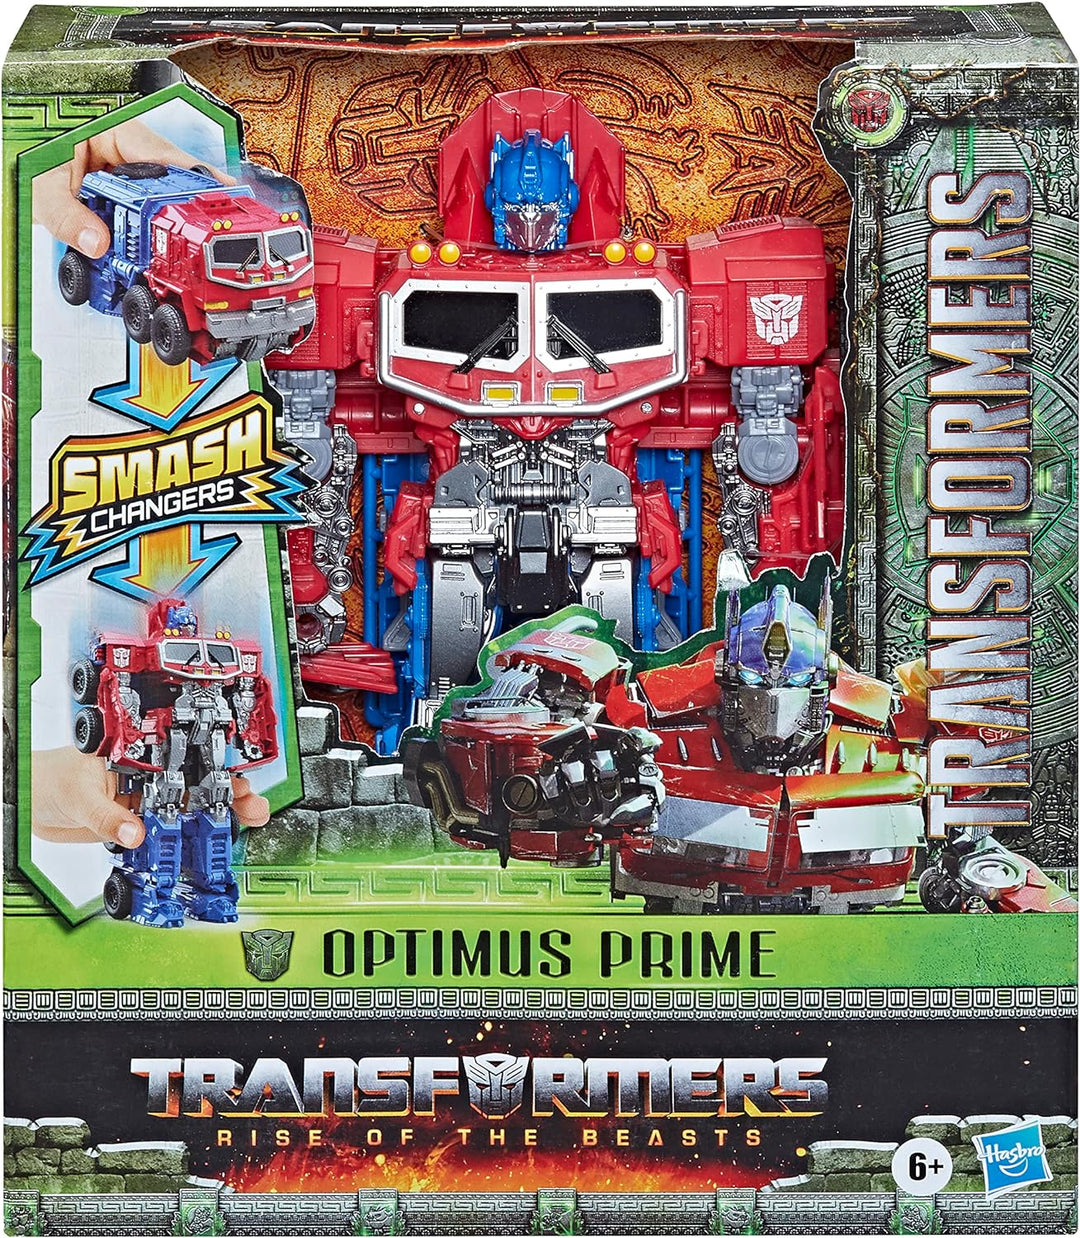 TRANSFORMERS Toys Rise of the Beasts Film, Smash Changer Optimus Prime Action Figure